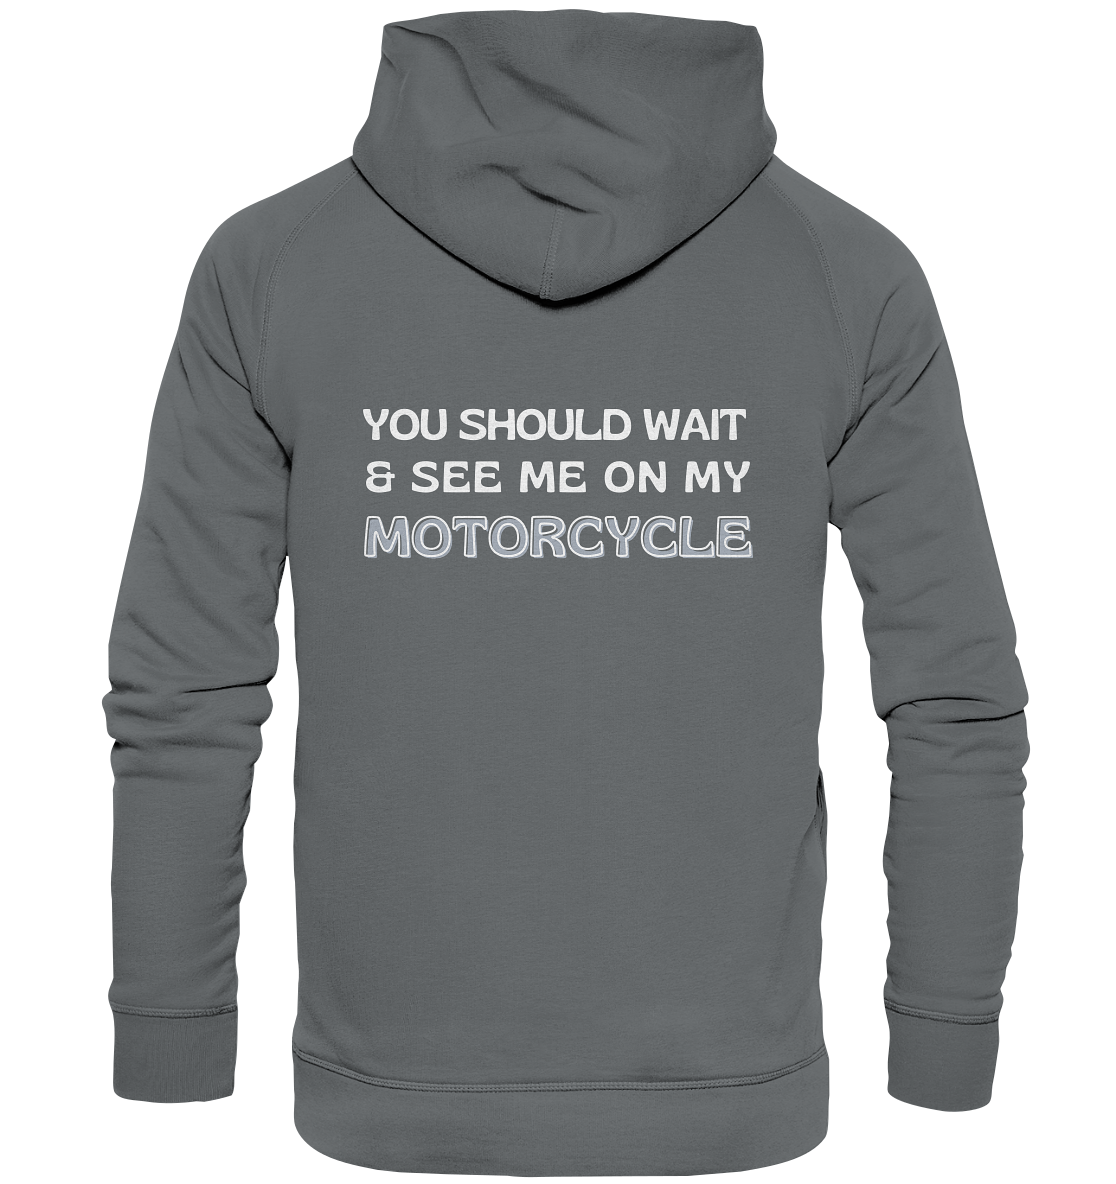 Motorrad-Hoodie _ beidseitig bedruckt. vorn: "If you think I'm sexy already", hinten "you should wait & see me on my motorcycle.", grau